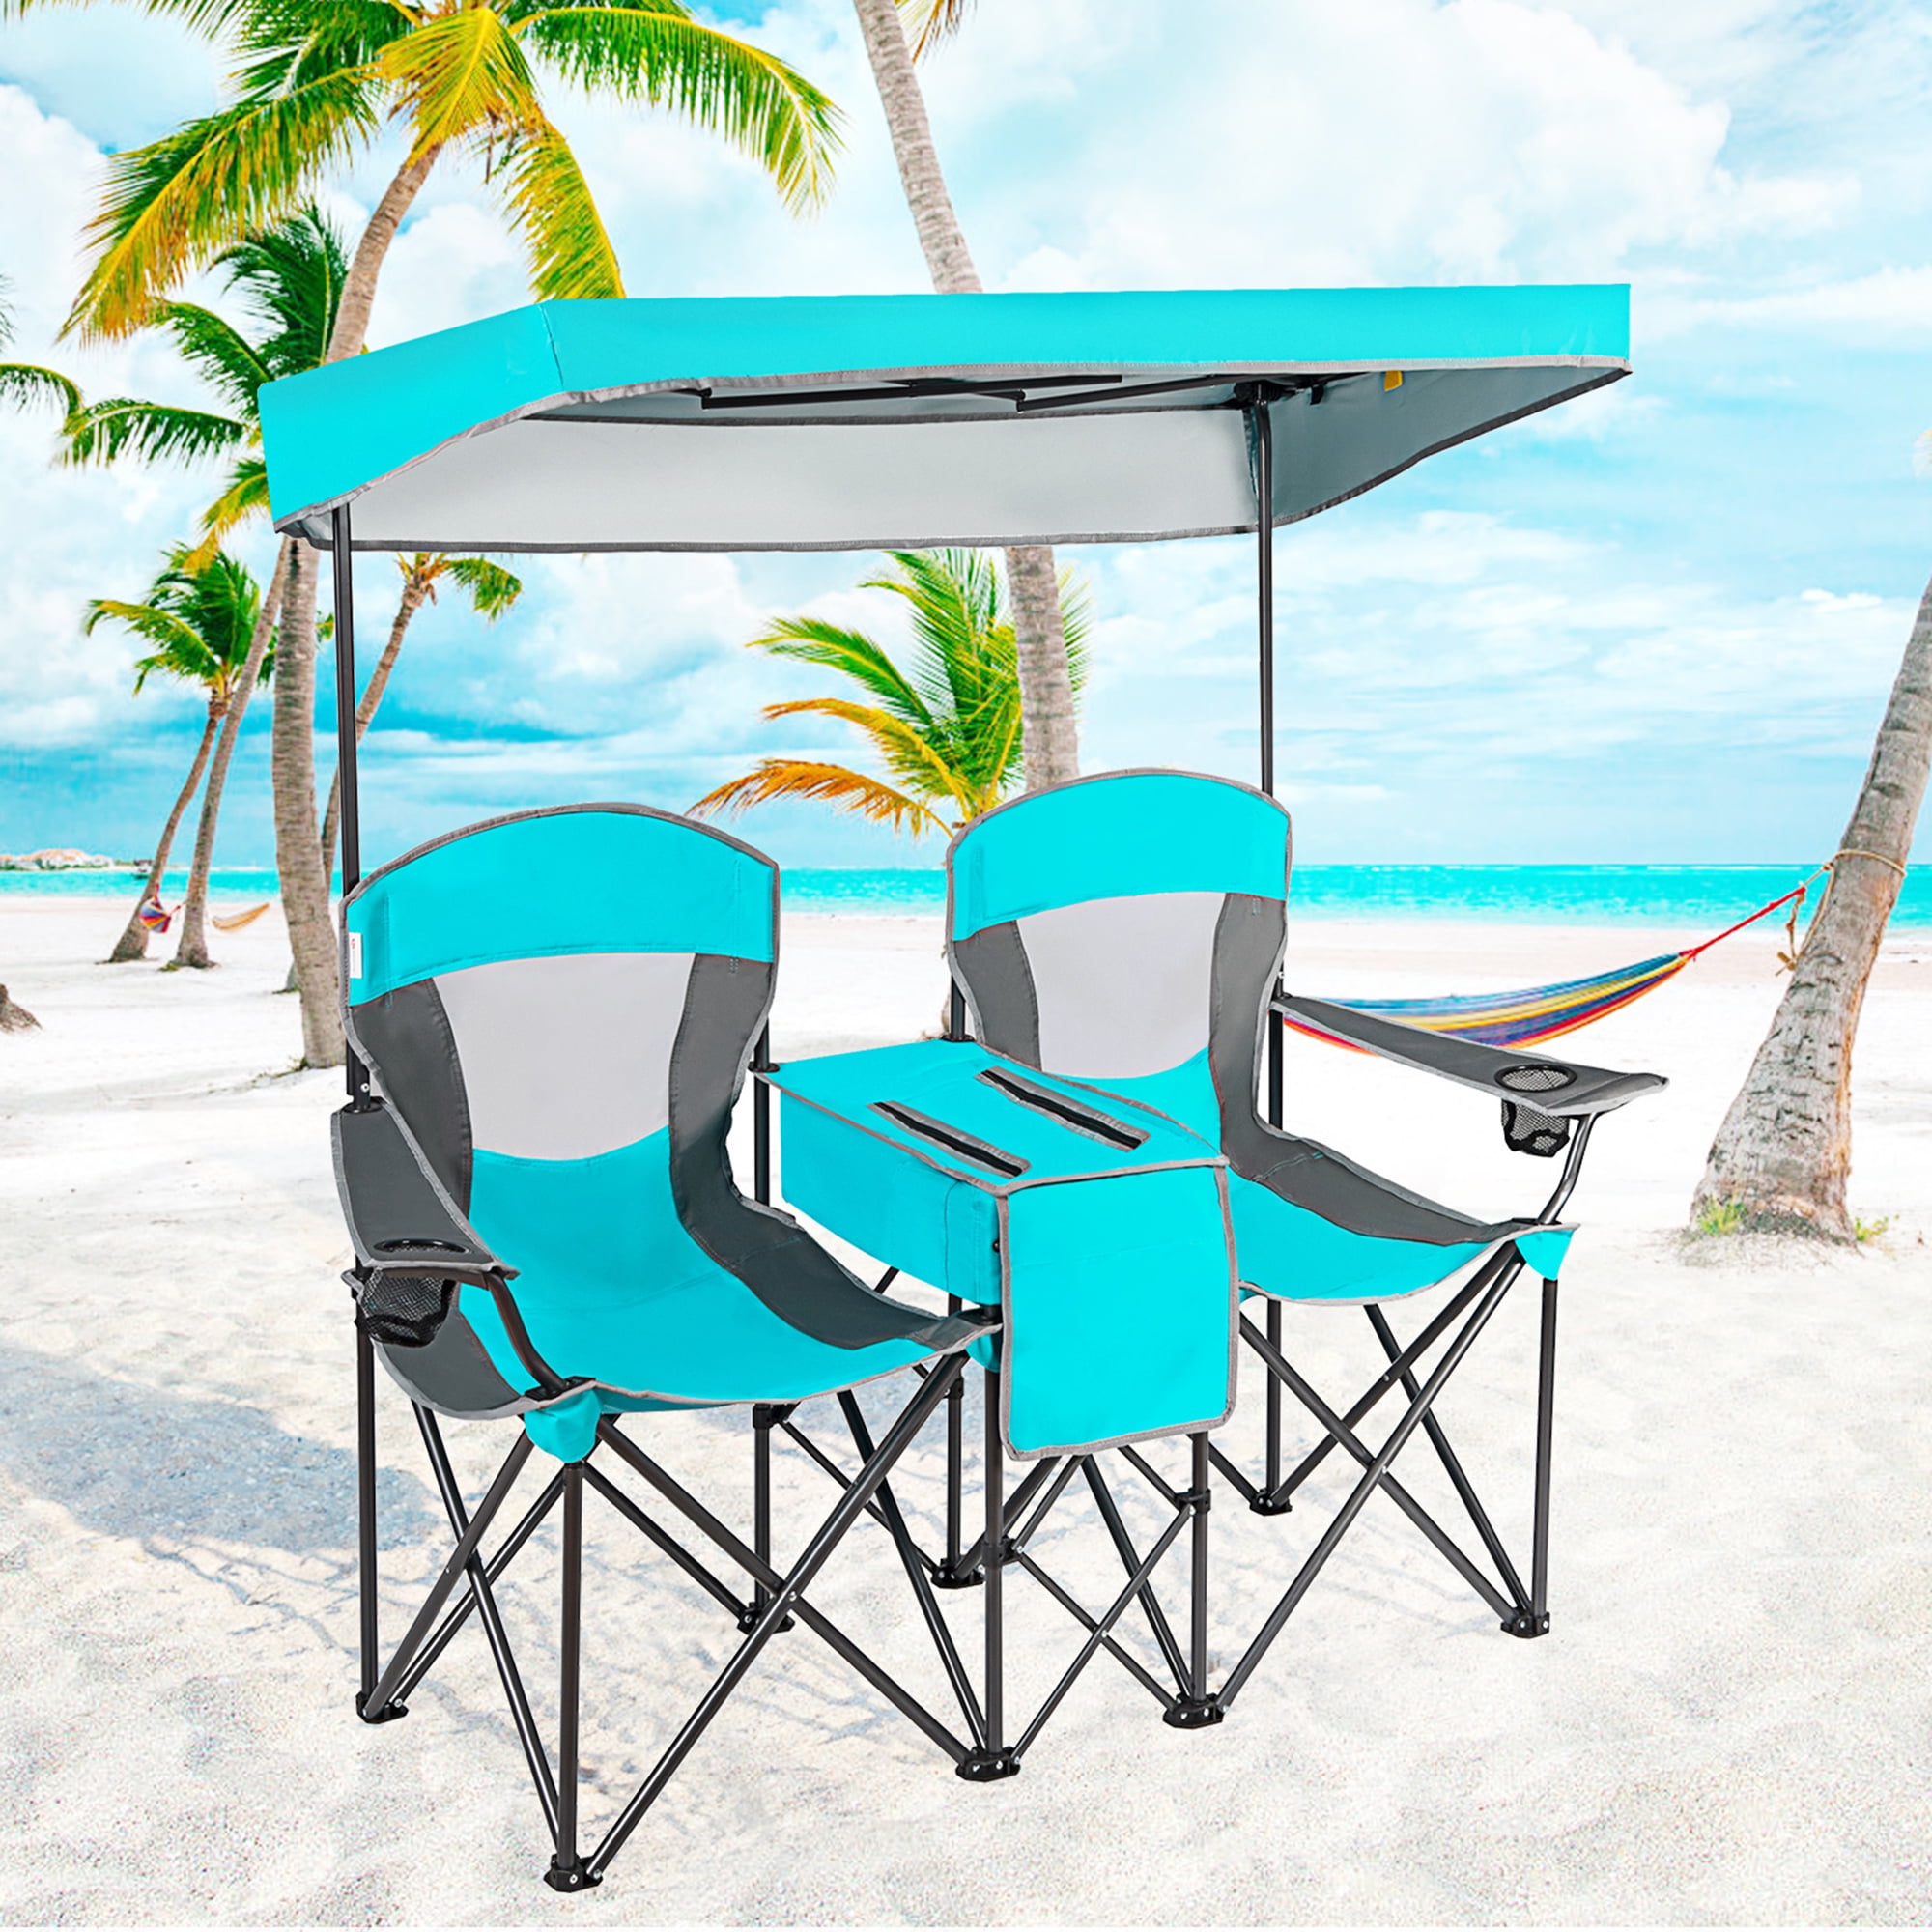  Folding Camping Chair with Canopy, Lightweight Sunshade  Portable Chair with Cup Holder, Outdoor Seat Chair for Hiking, Garden,  Fishing, Beach Durable : Sports & Outdoors